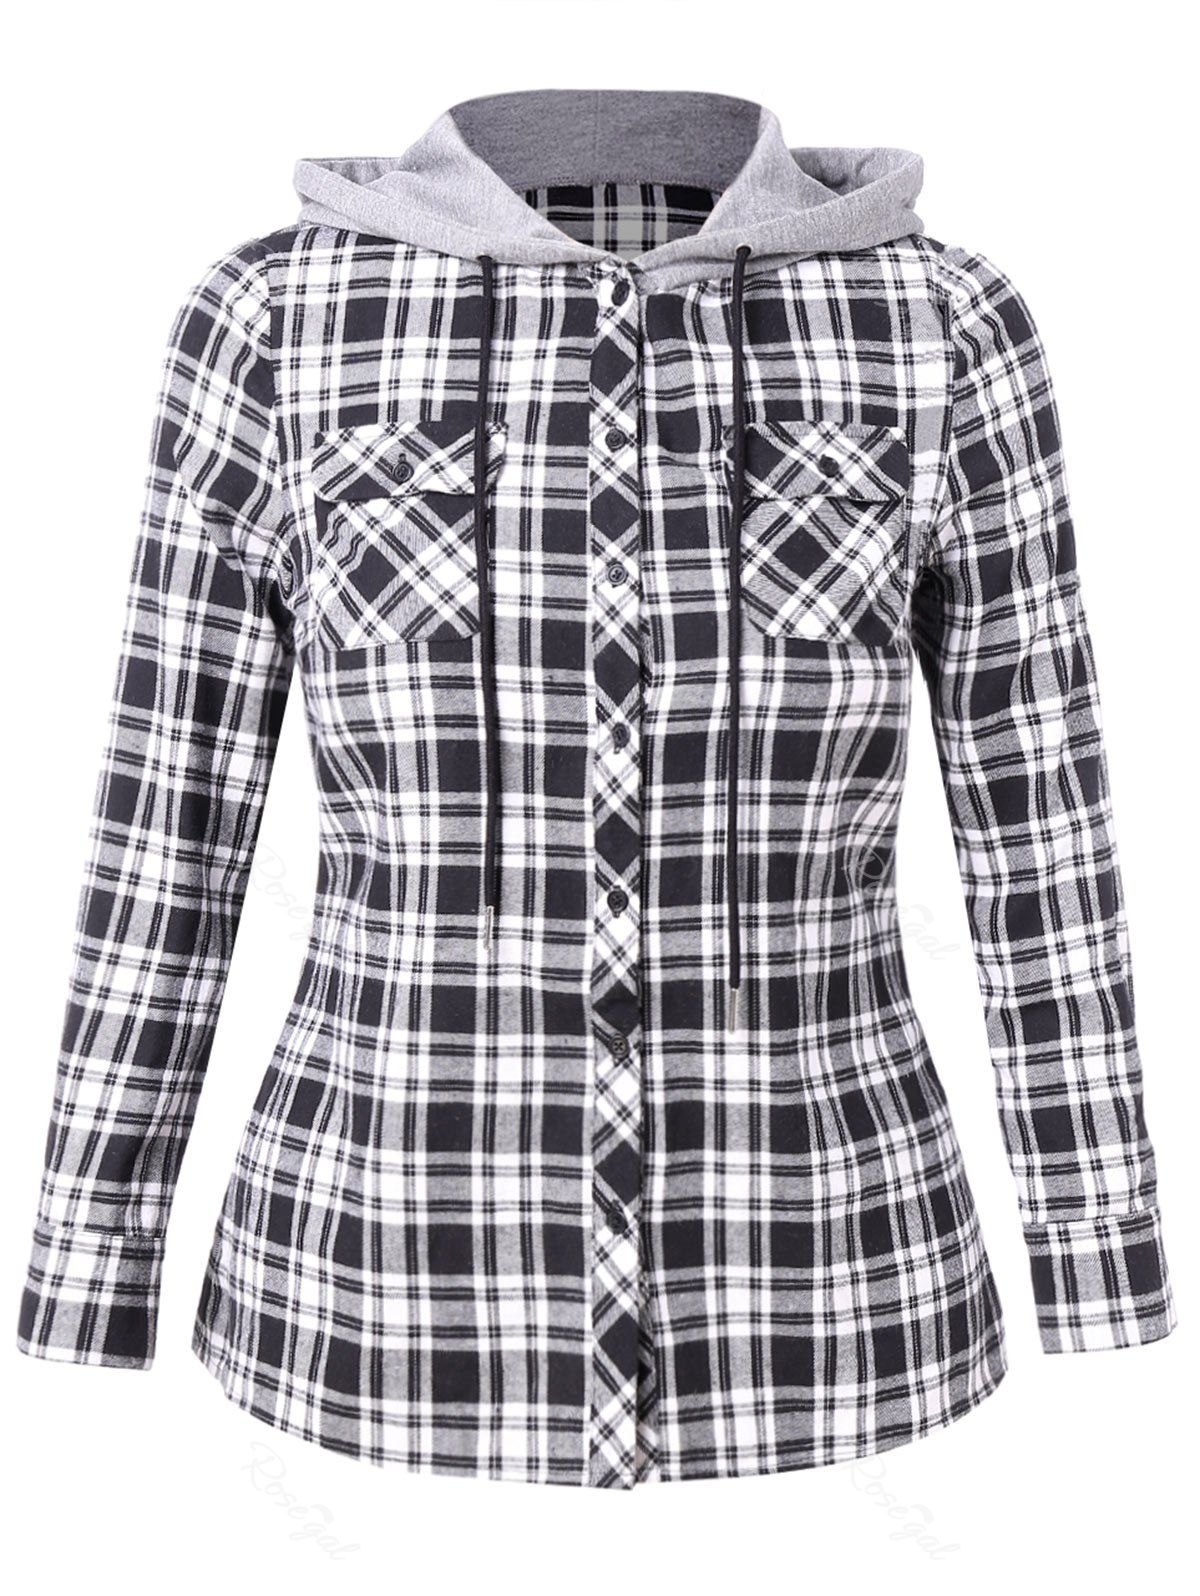 Shop Plus Size Plaid Hooded Shirt with Pockets  